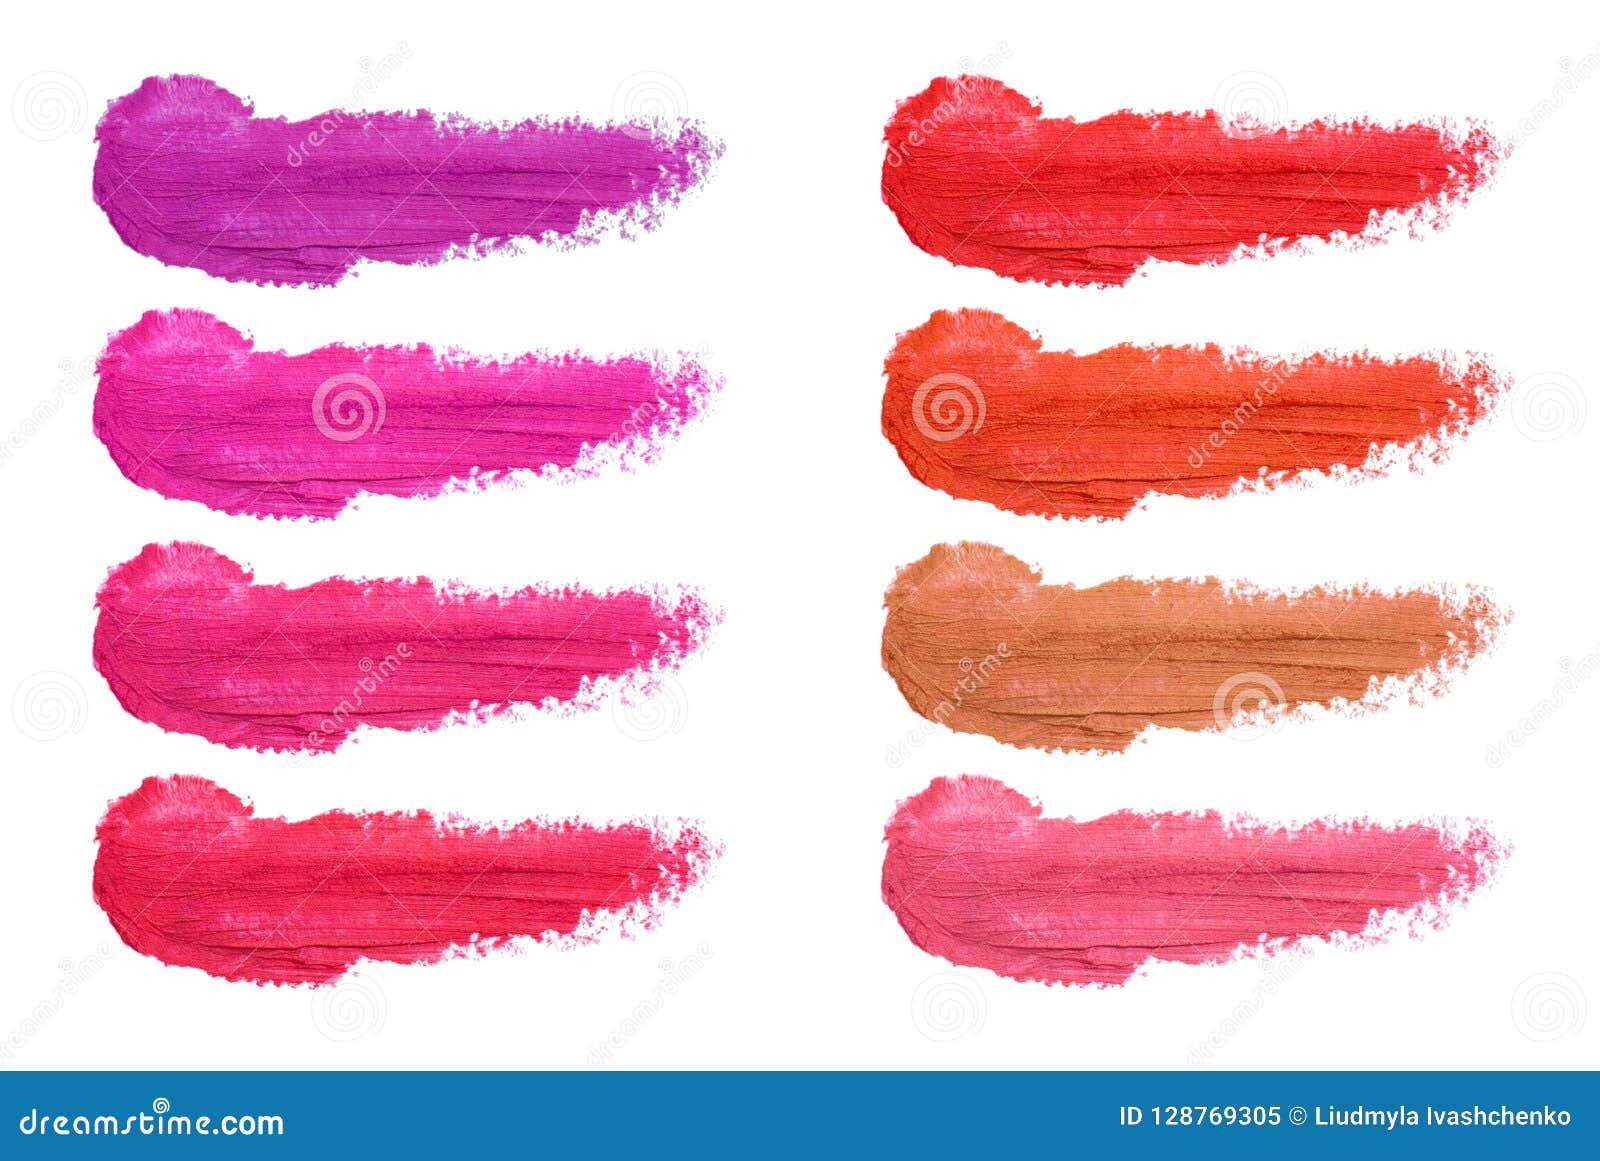 Set Of Lipstick Smudges Isolated On White Background. Smudged Makeup ...